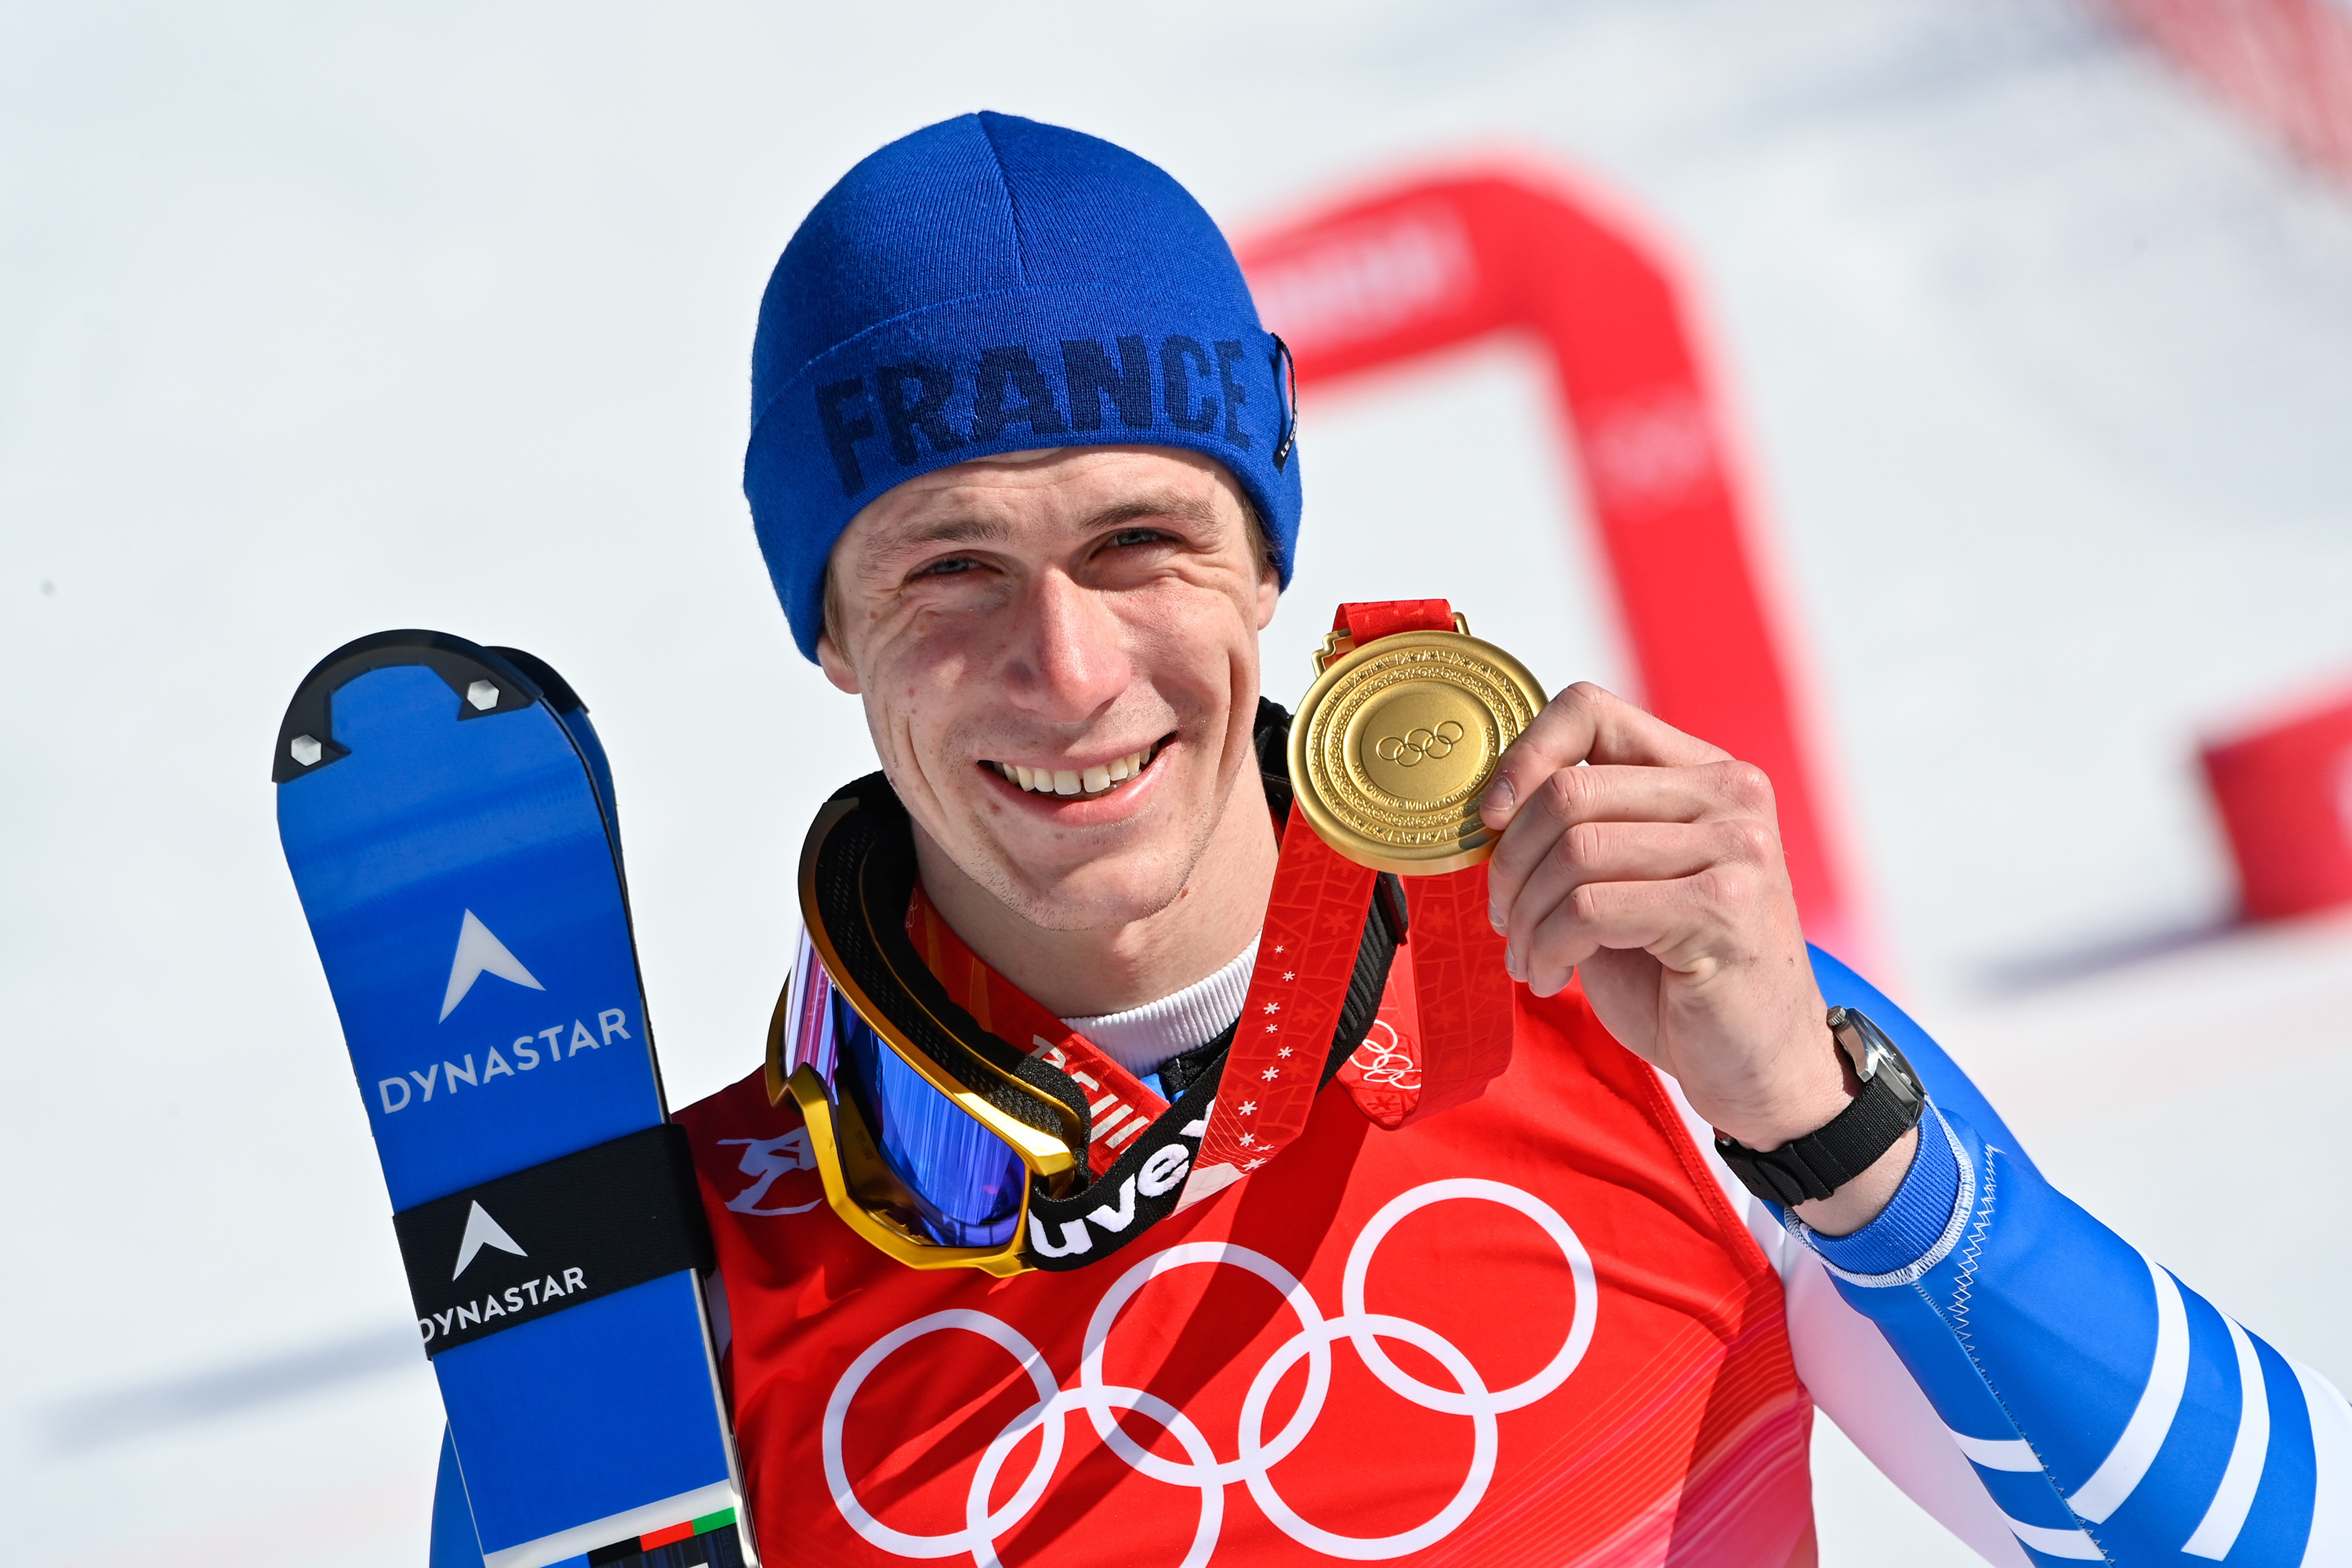 France's Clement Noel poses during the men's slalom victory ceremony on Wednesday.